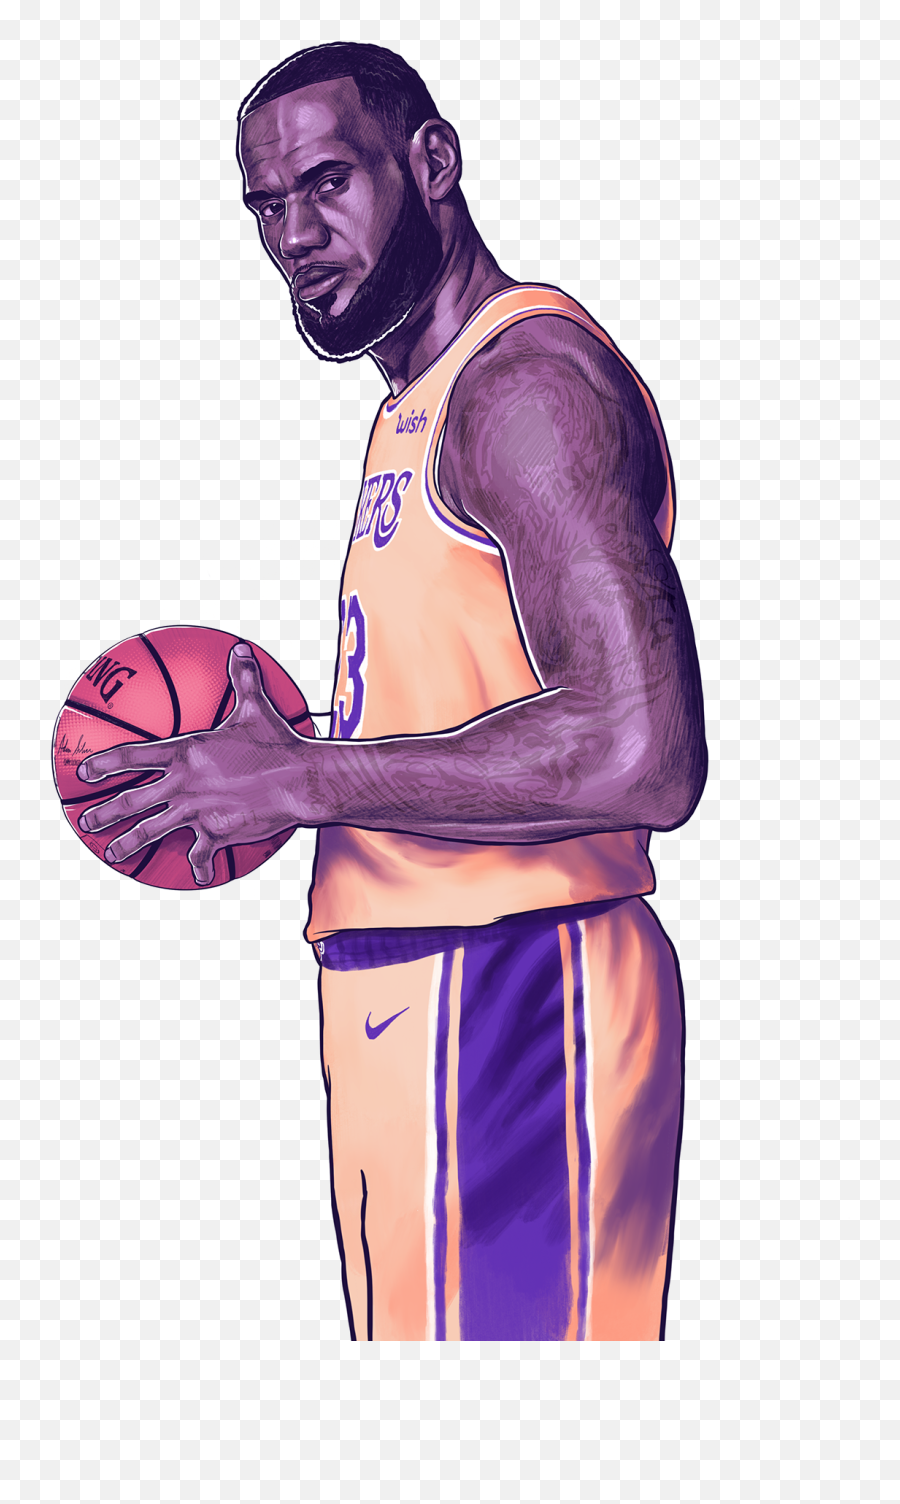 Download Save To Collection - Basketball Player Full Size Emoji,Basketball Player Png